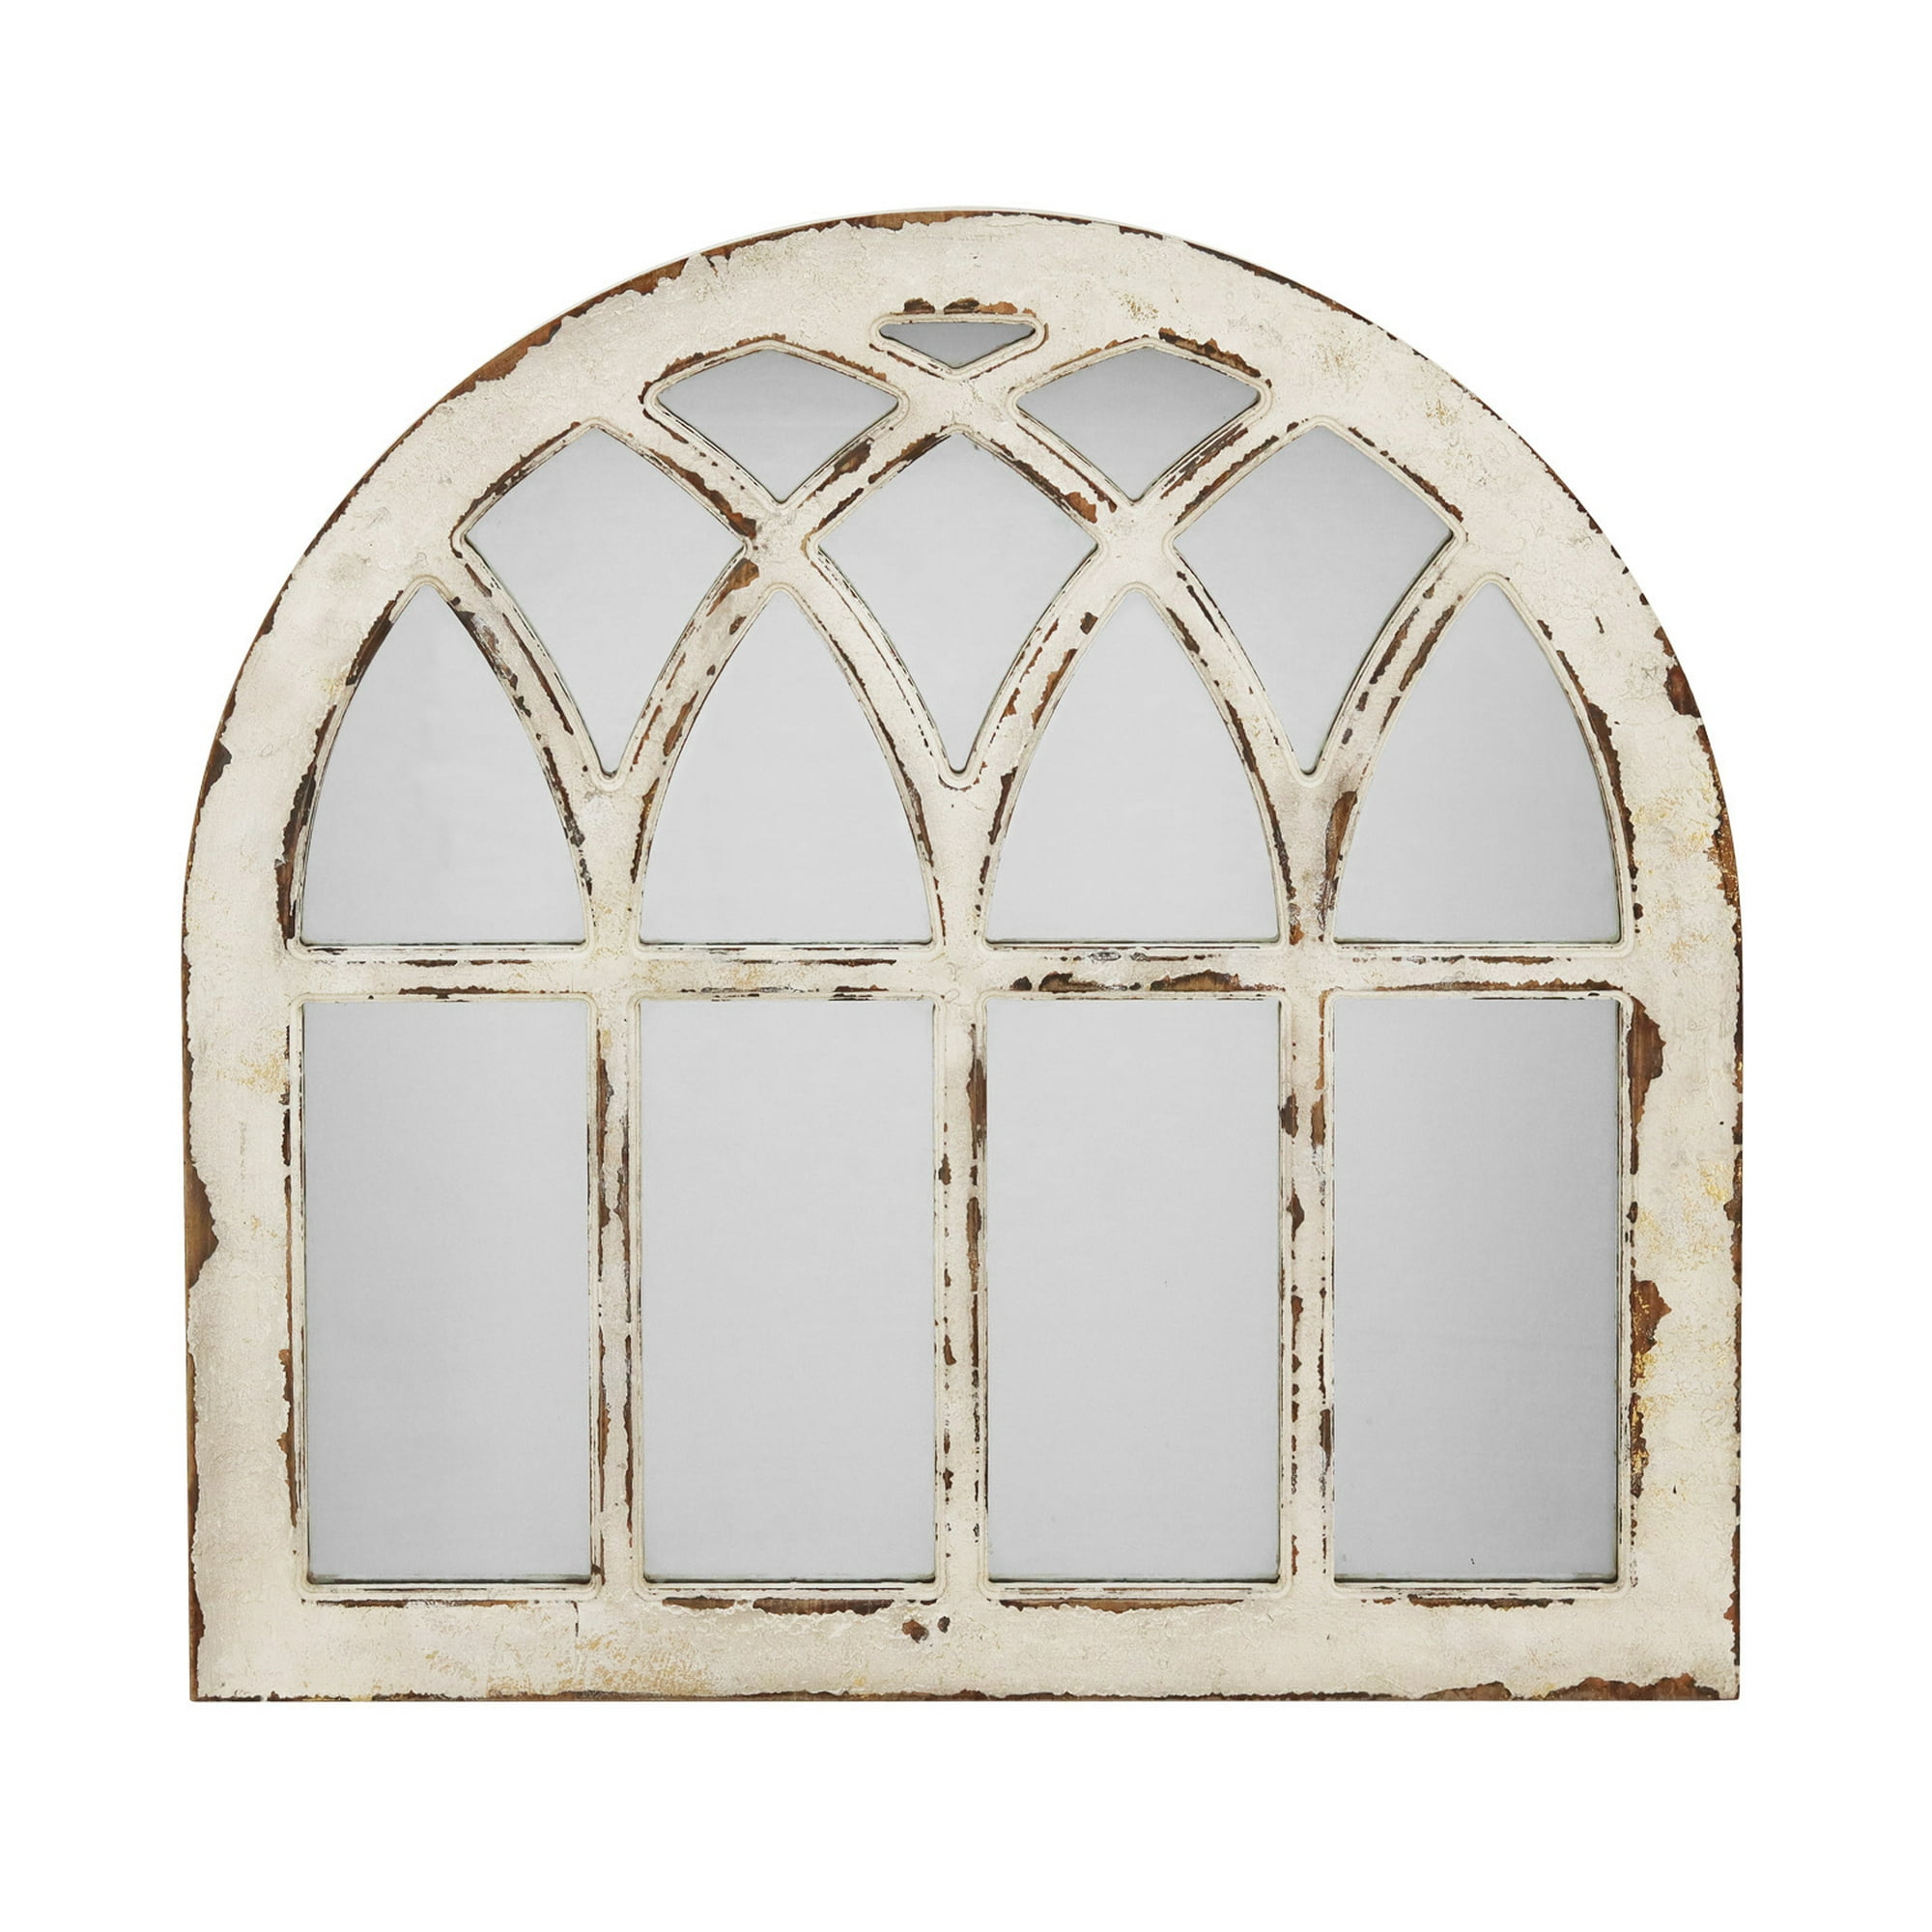 Parisloft Distressed White Arched, Oversized Arched Mirror Canada